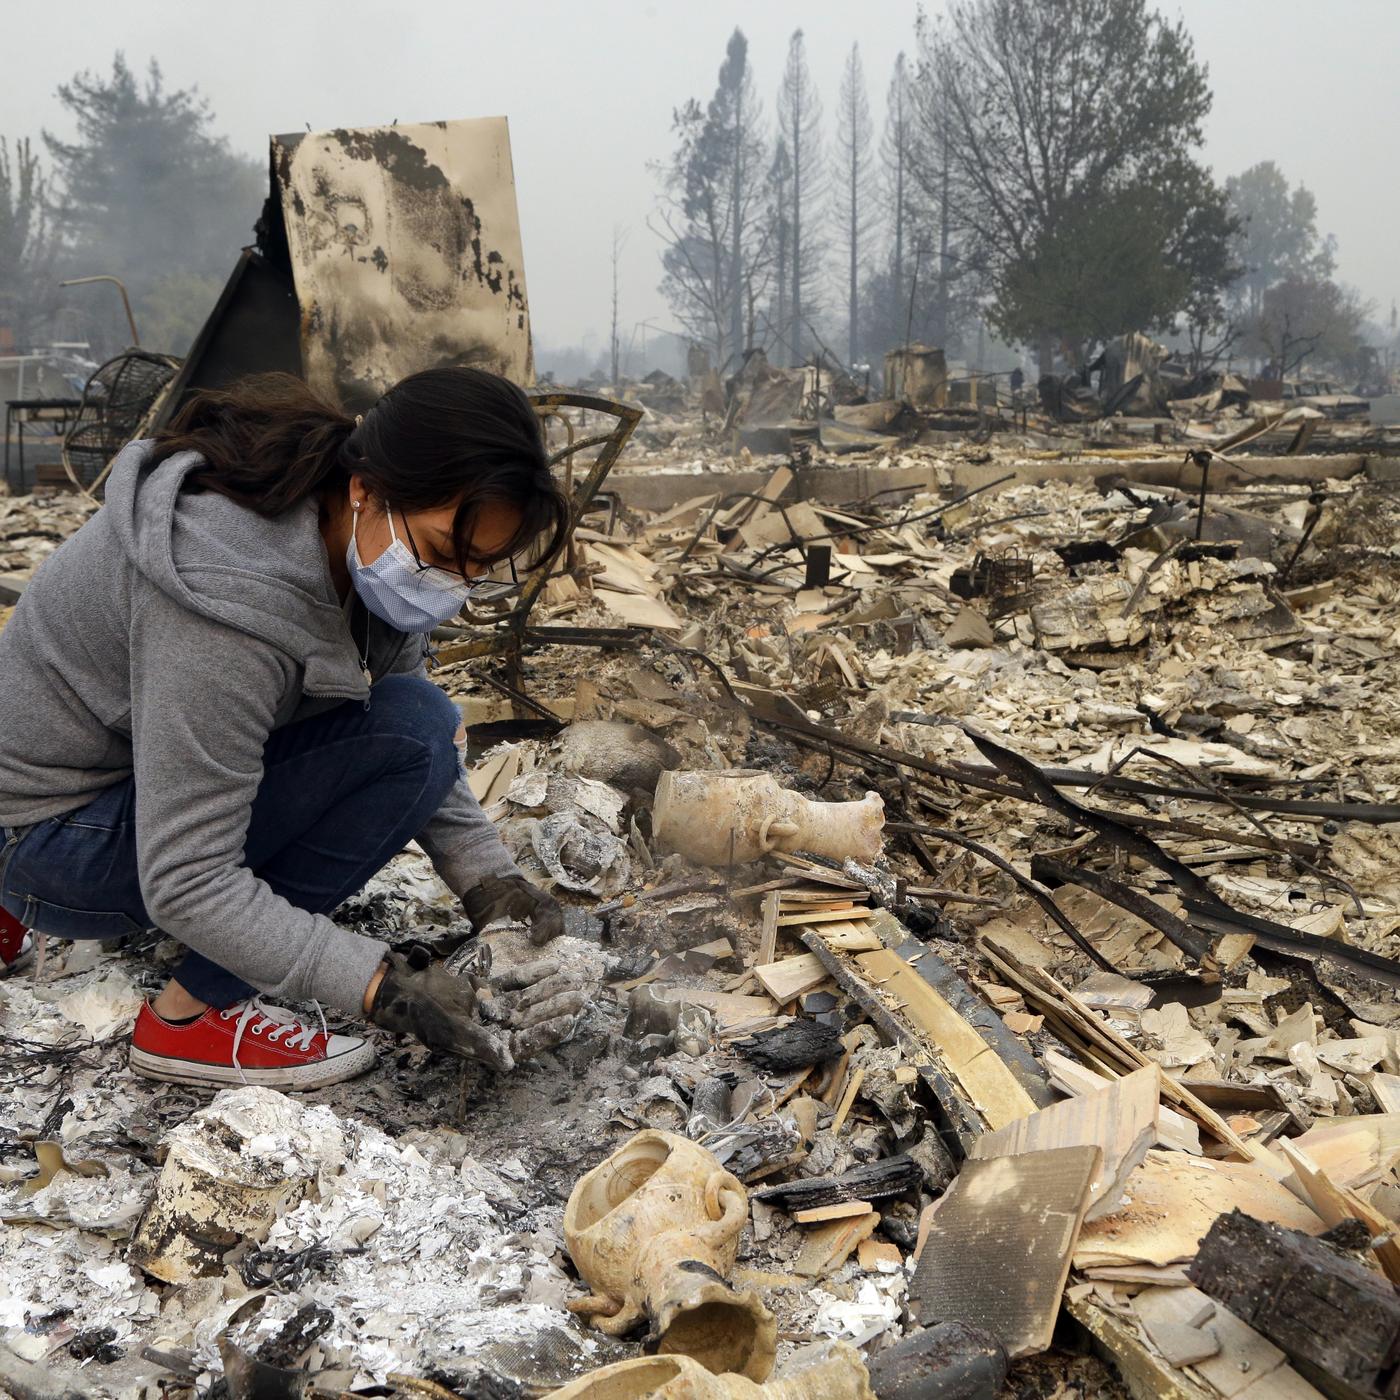 'Everybody Has Been Devastated': Evacuees Plead for Help as Wildfires
Torch California